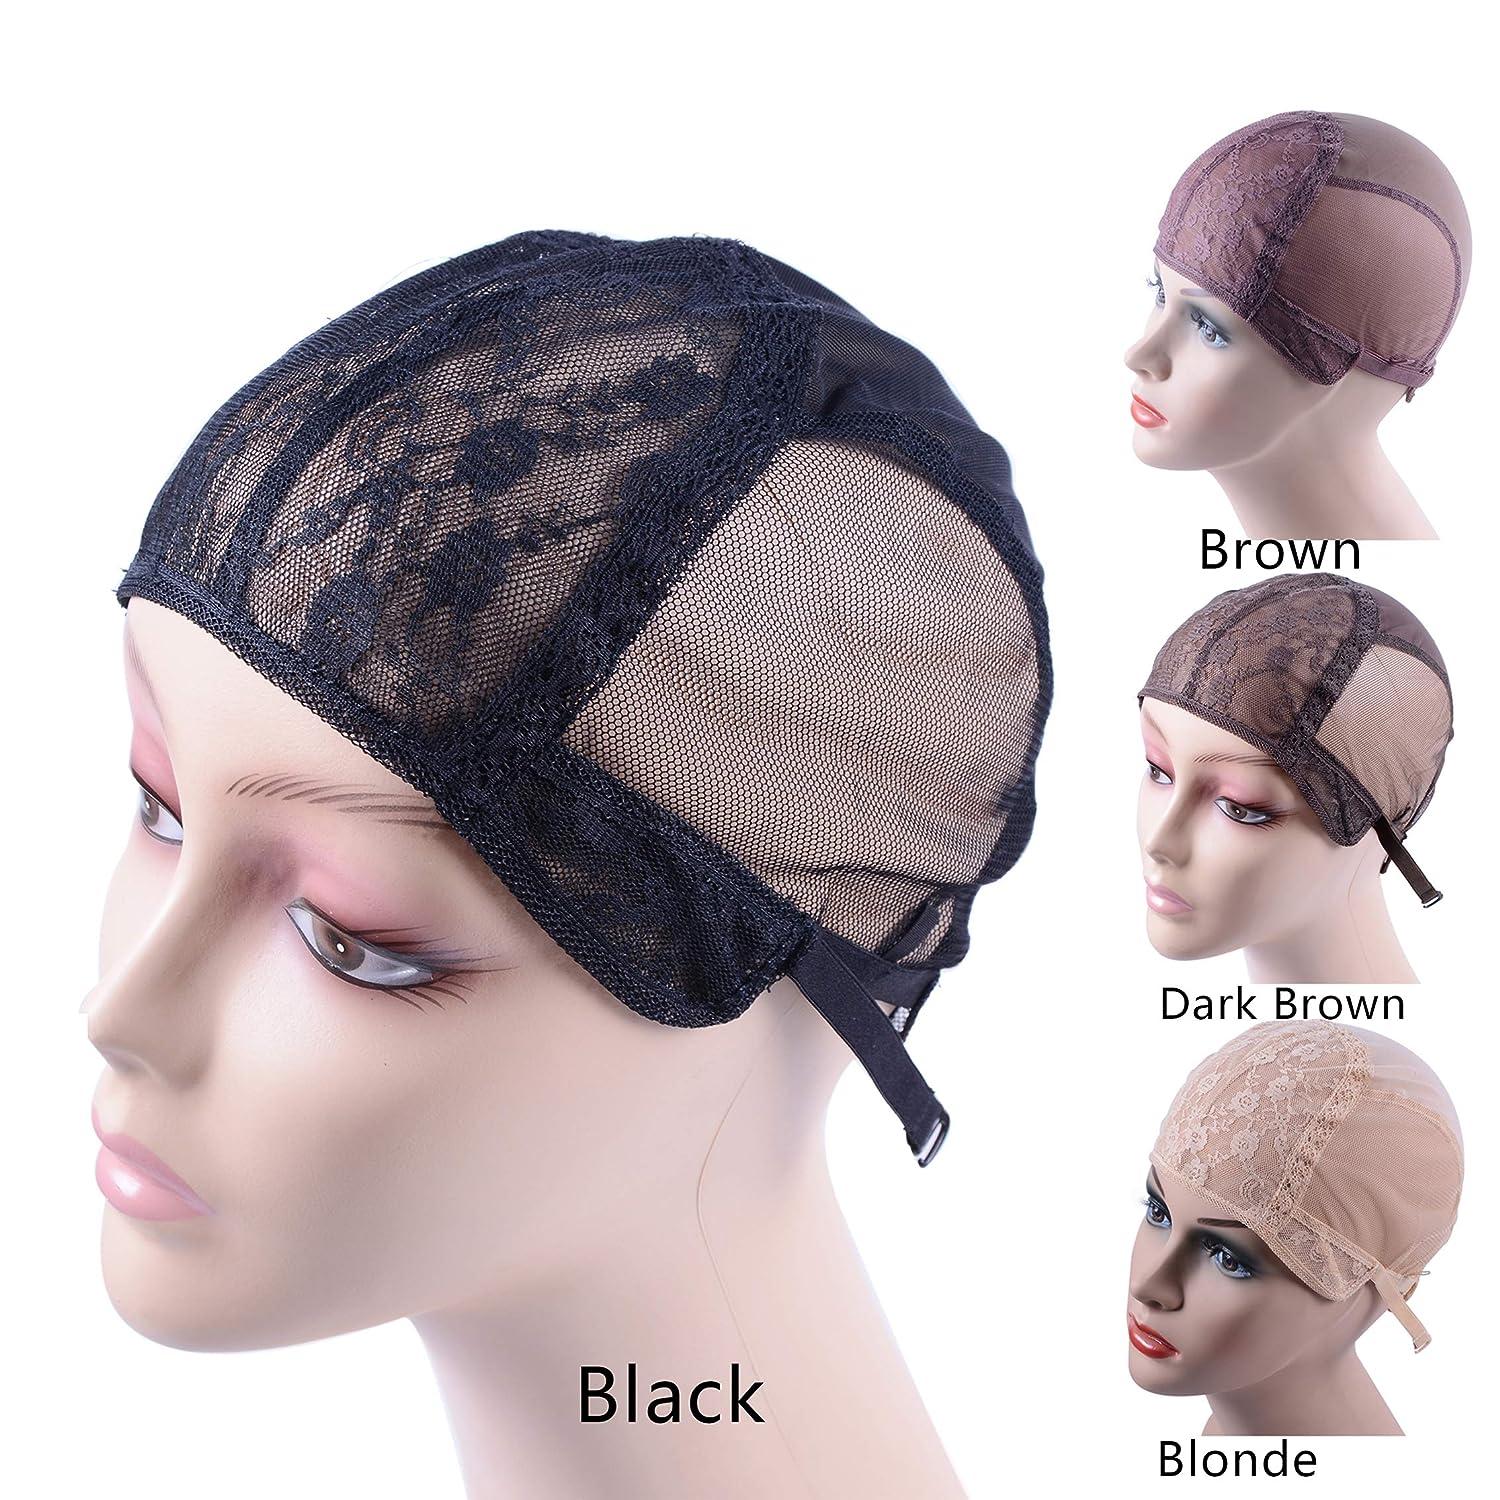 Black U Part Wig Cap with Lace Adjustable Straps for Making Wigs